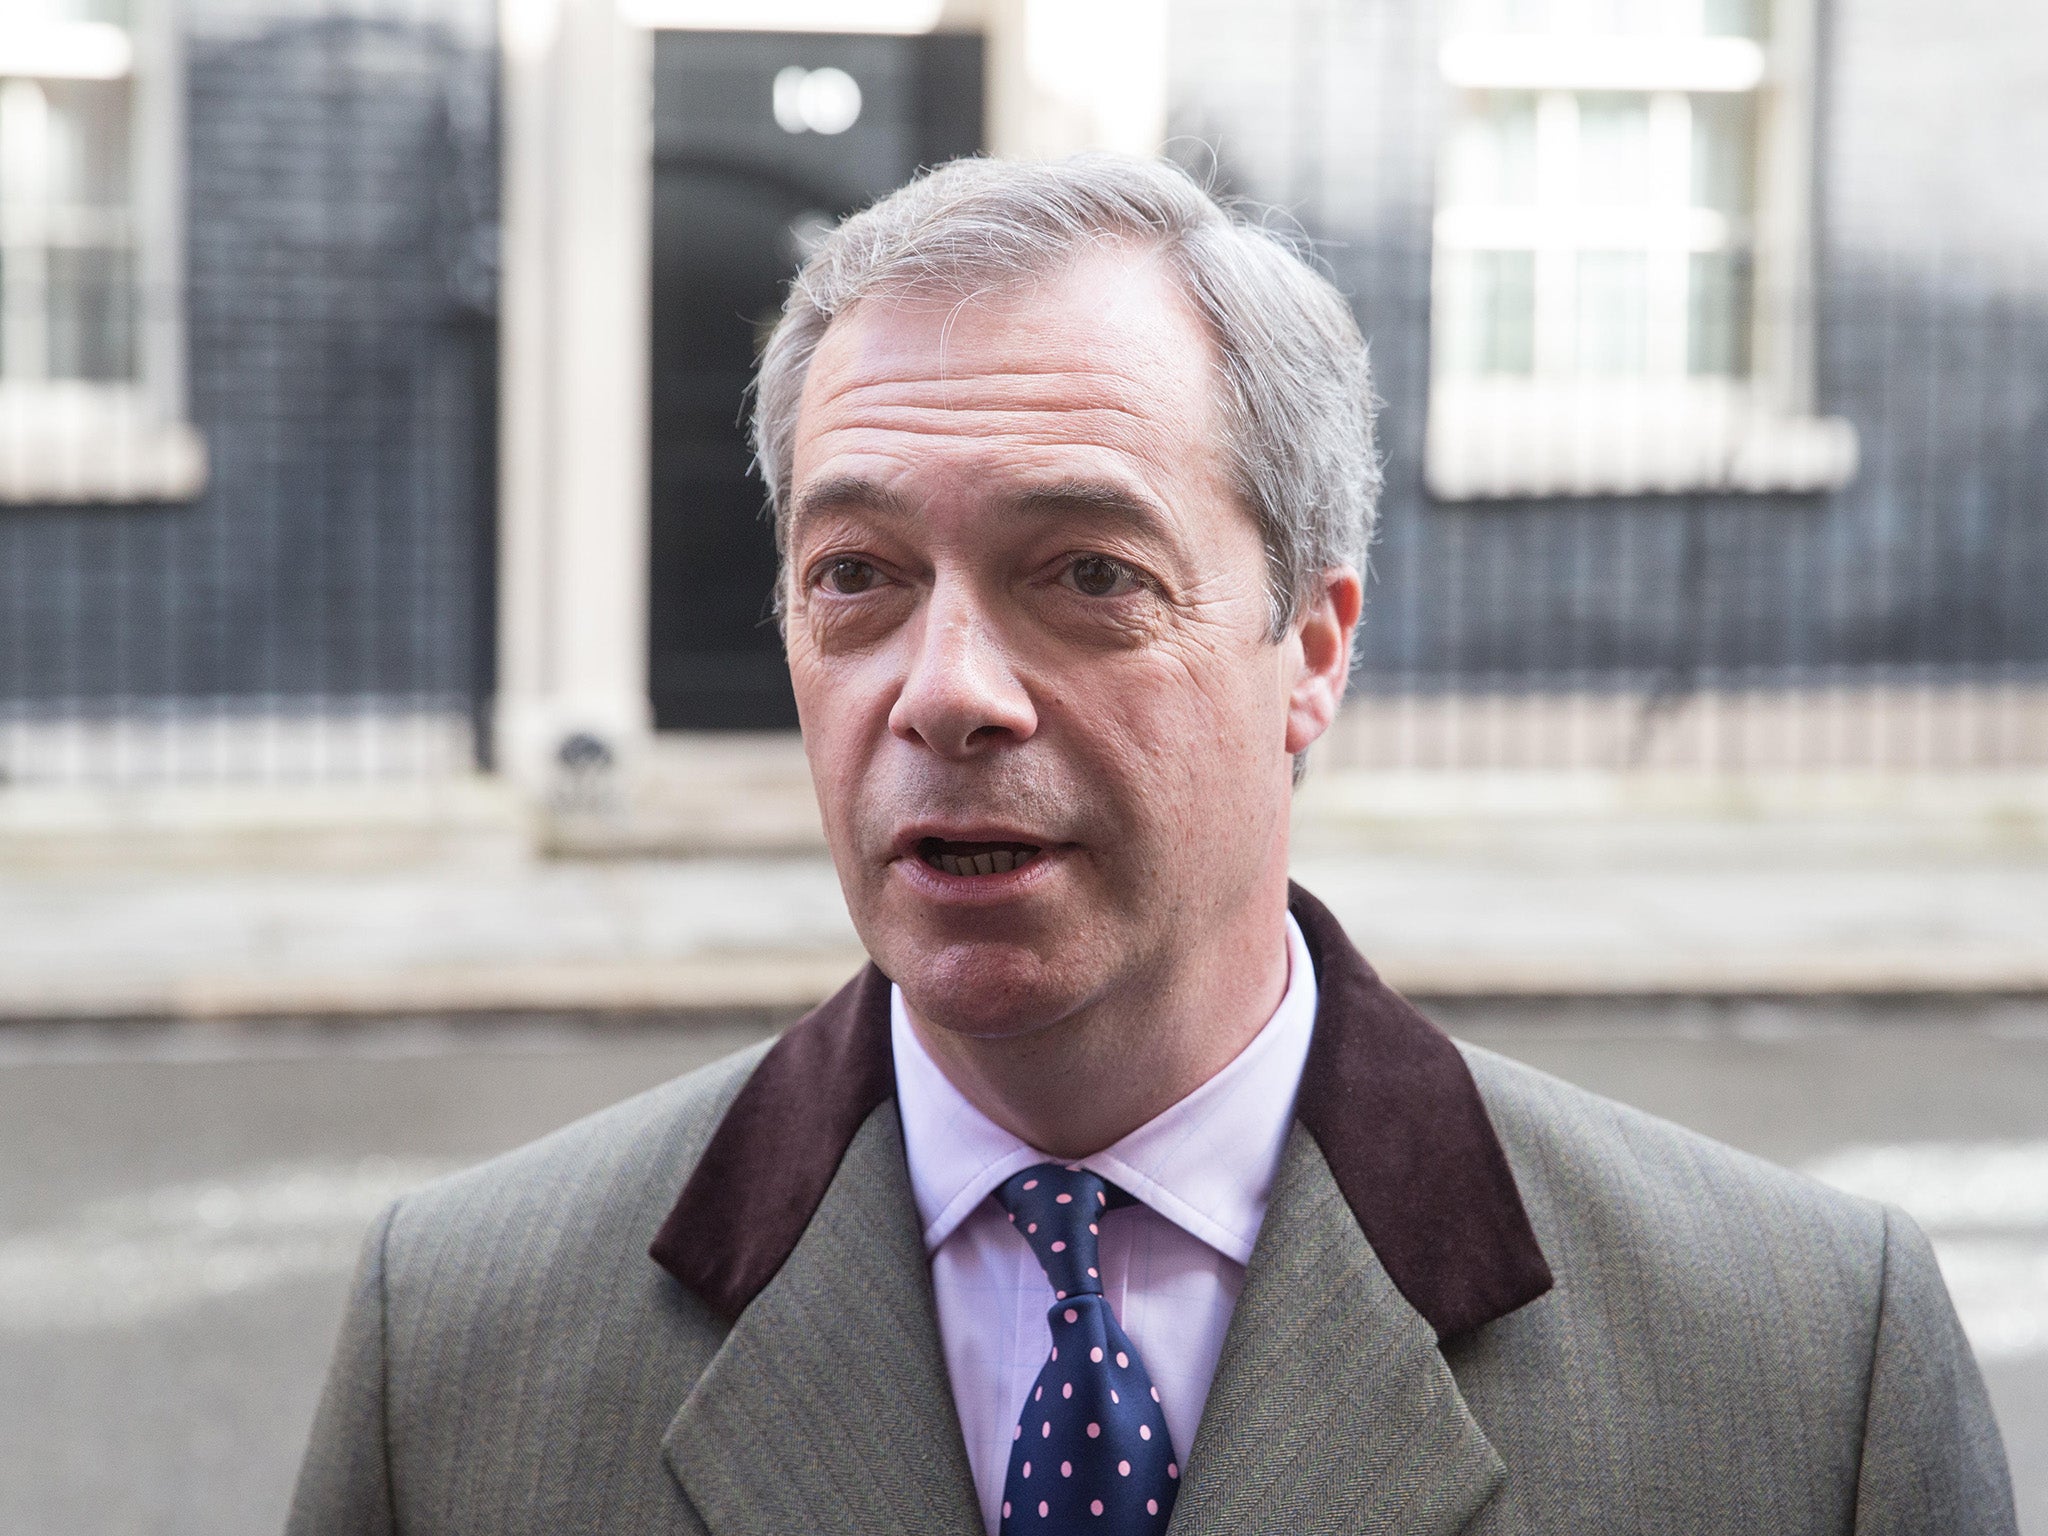 Nigel Farage, former head of Ukip, has been a target of abuse